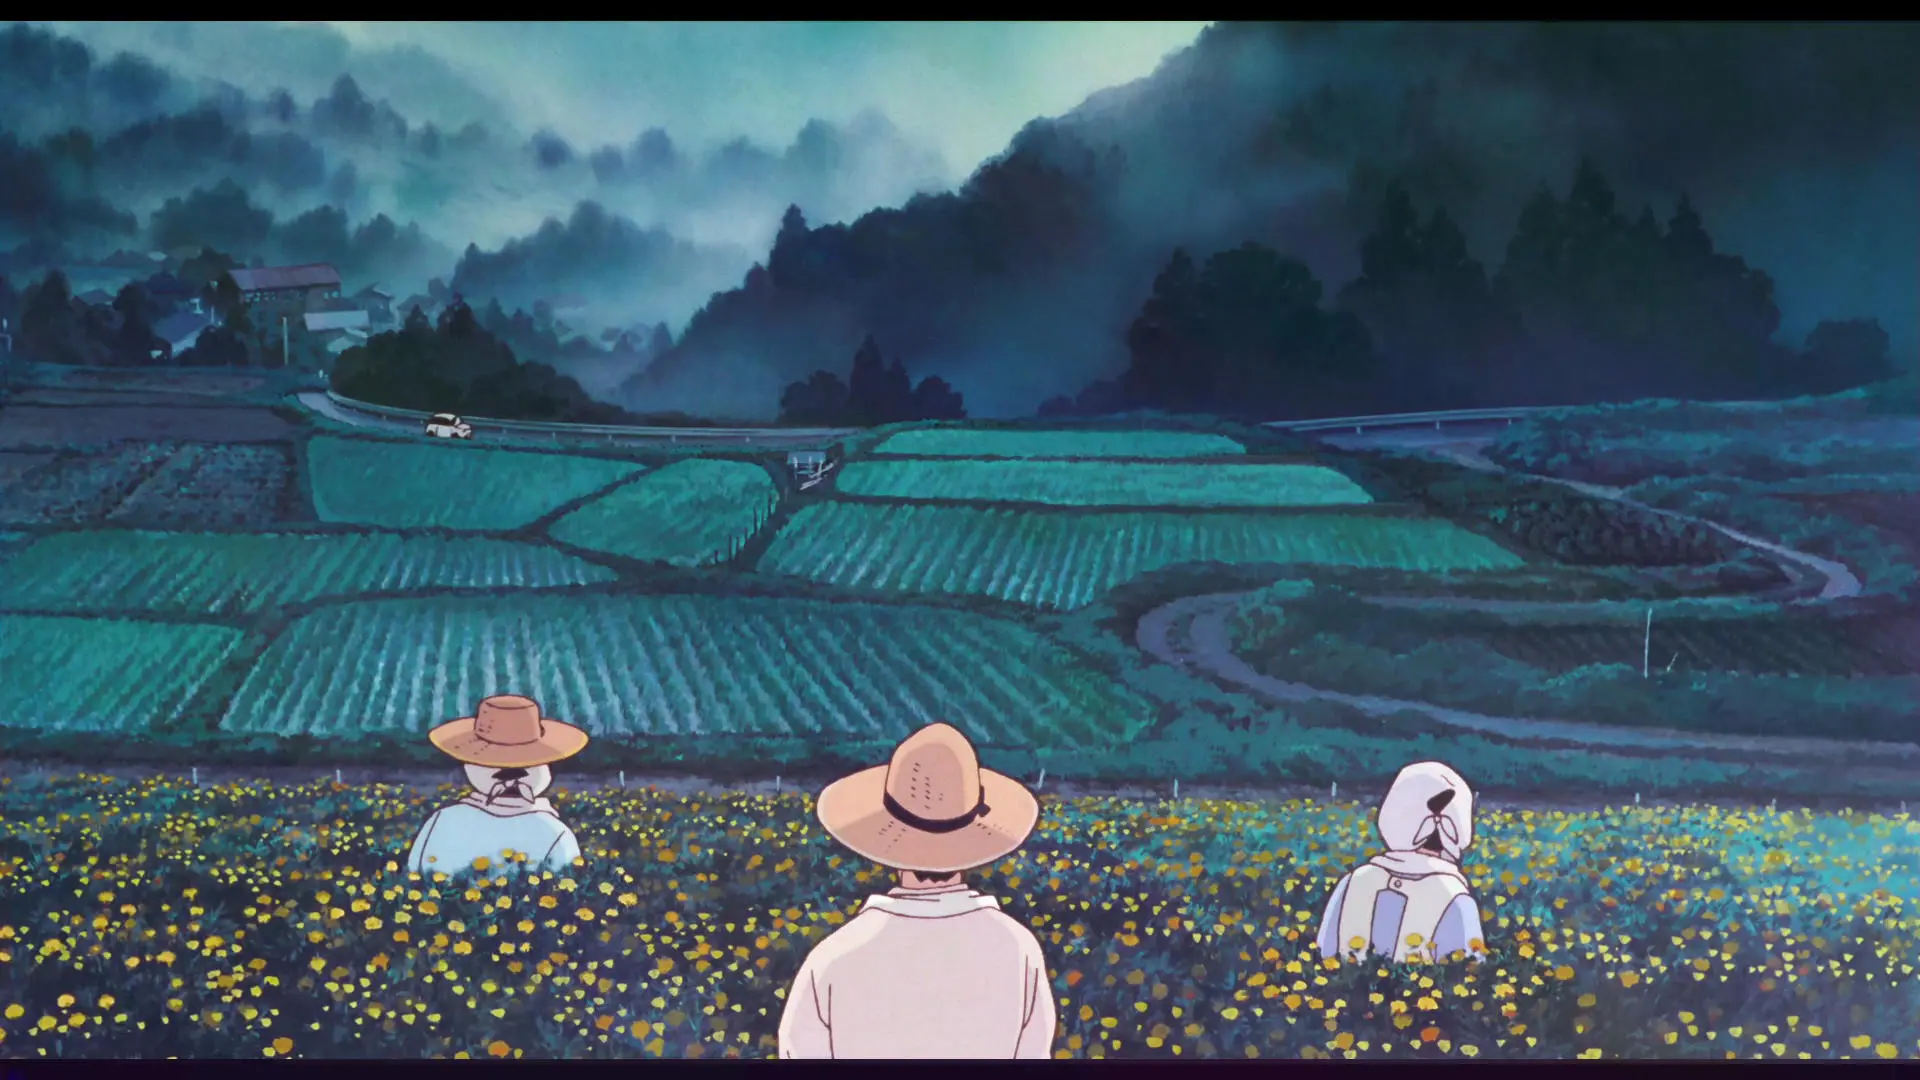 Screenshot 1 from the anime